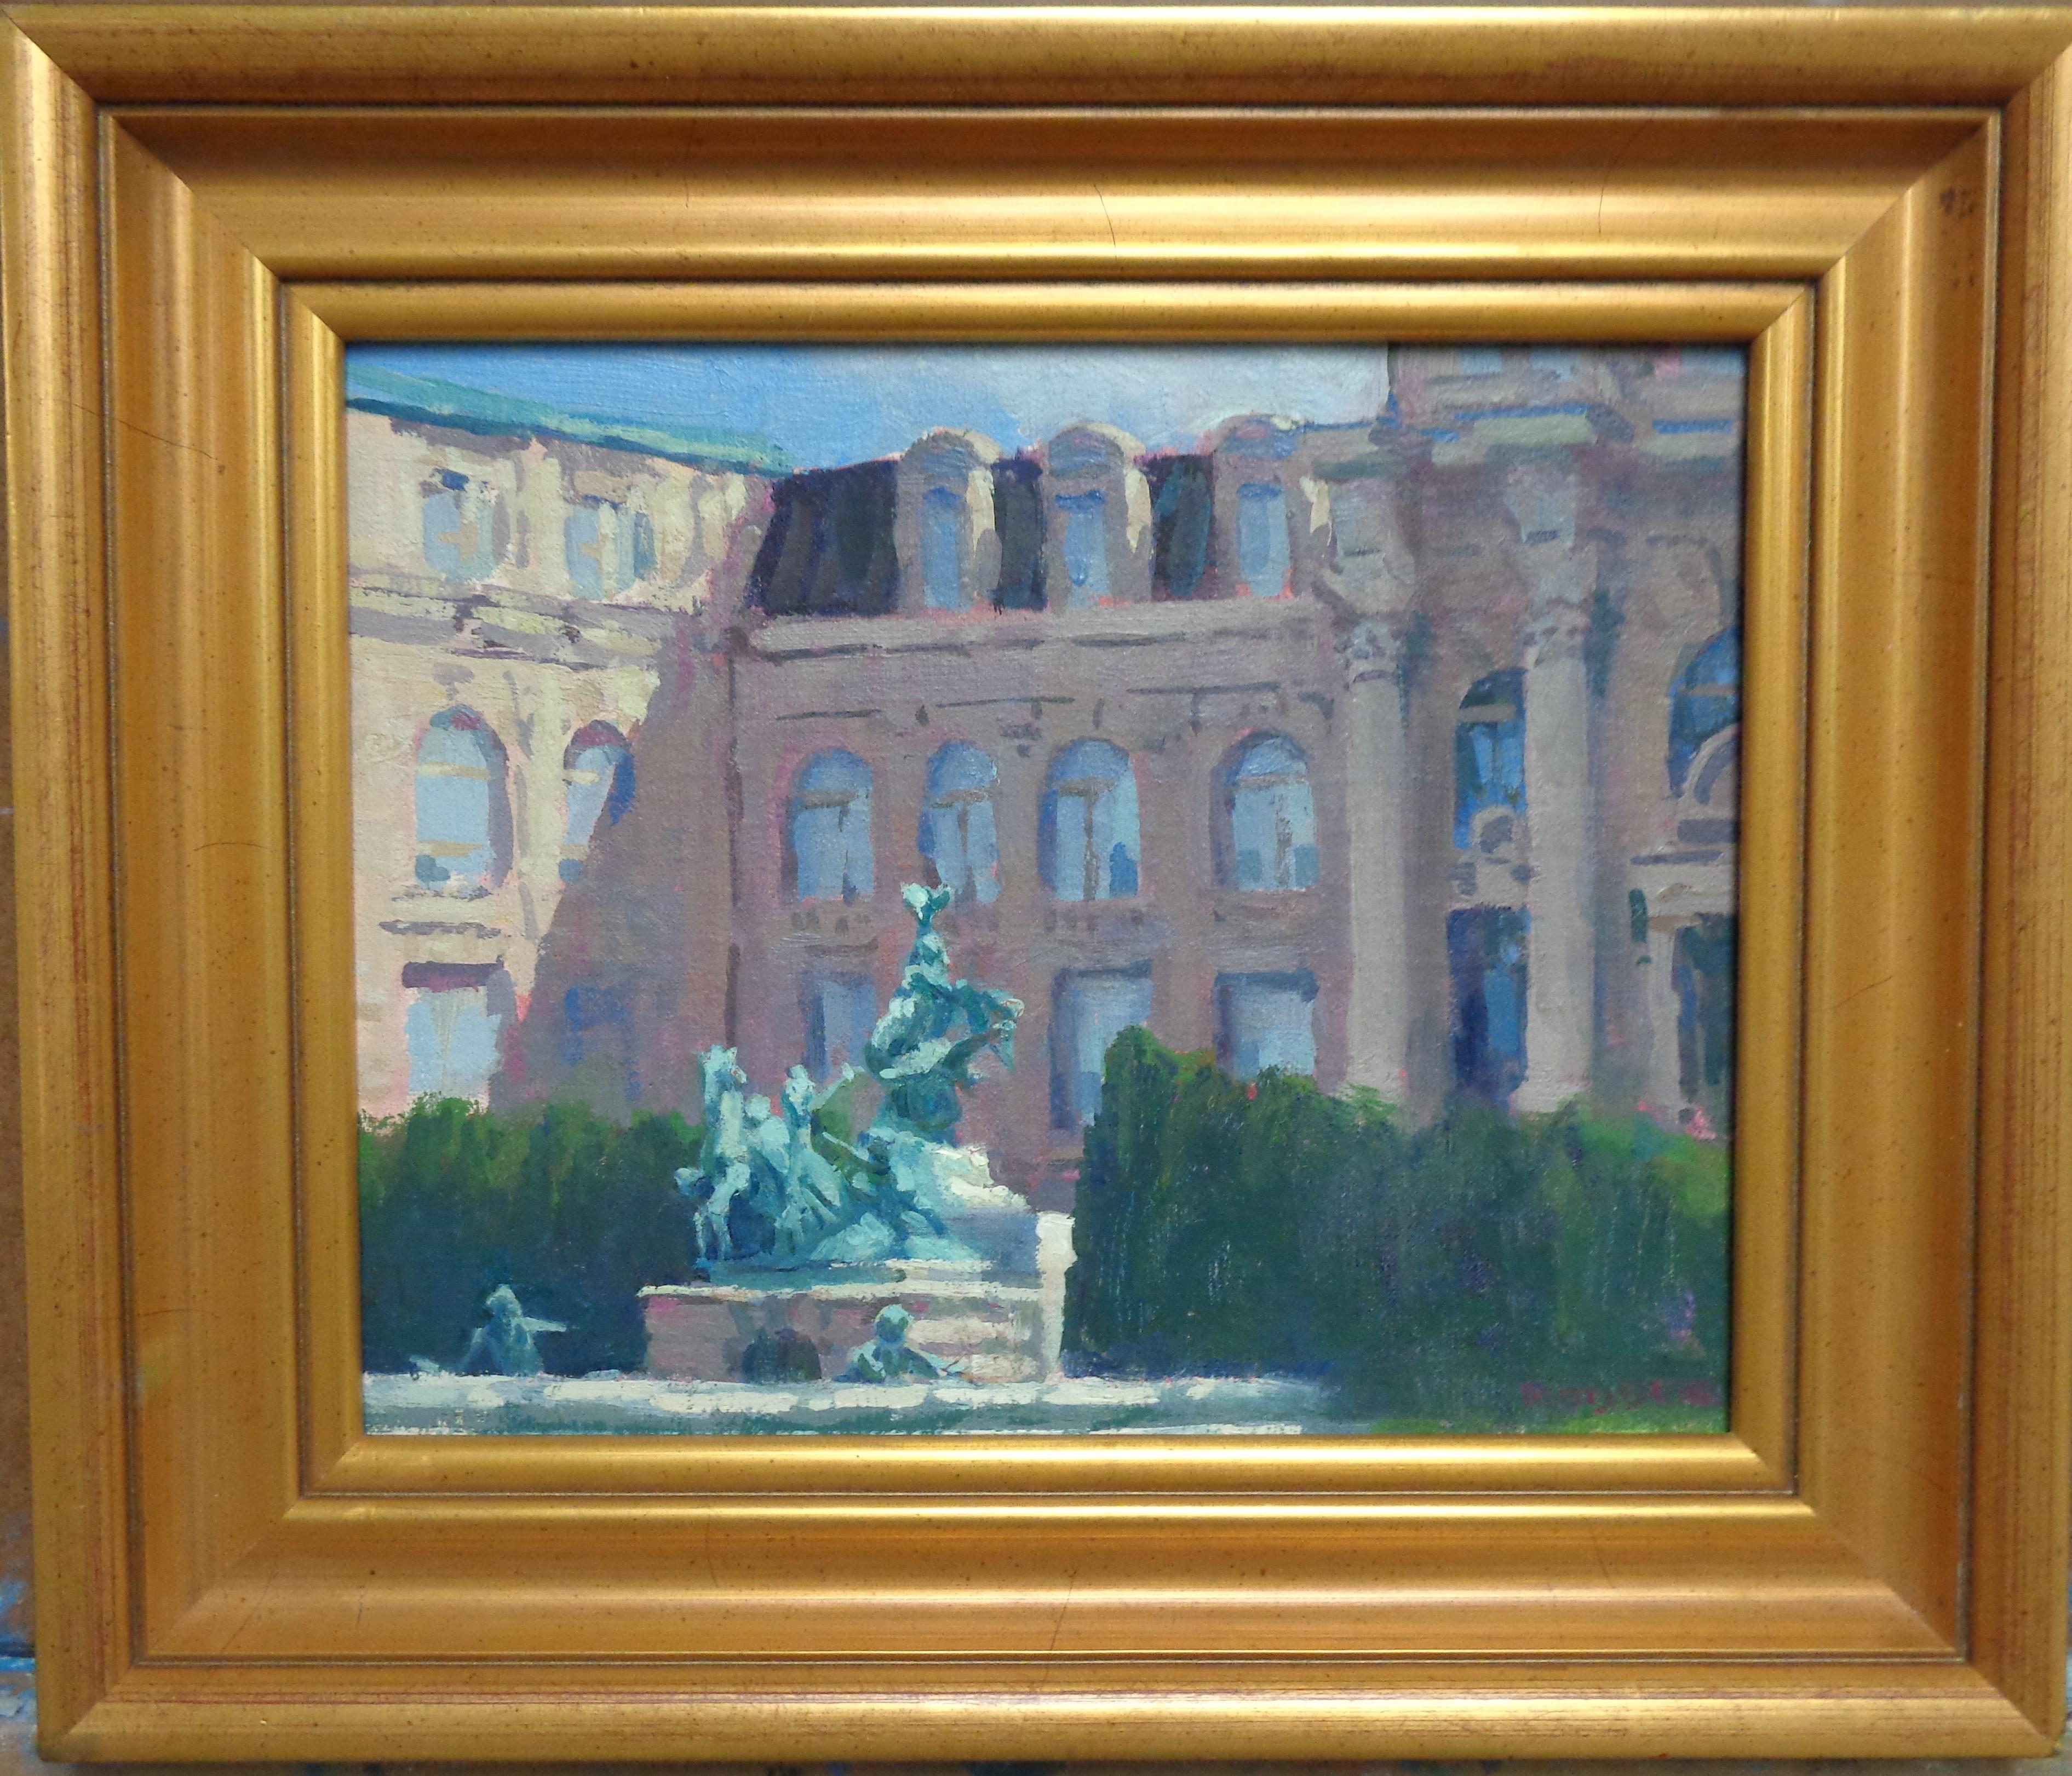 An oil painting on canvas panel by award winning contemporary artist Michael Budden that showcases the Botanical Gardens just north of New York City.  The image measures 8 x 10 unframed. The frame show some age from wear on its sides but reads well